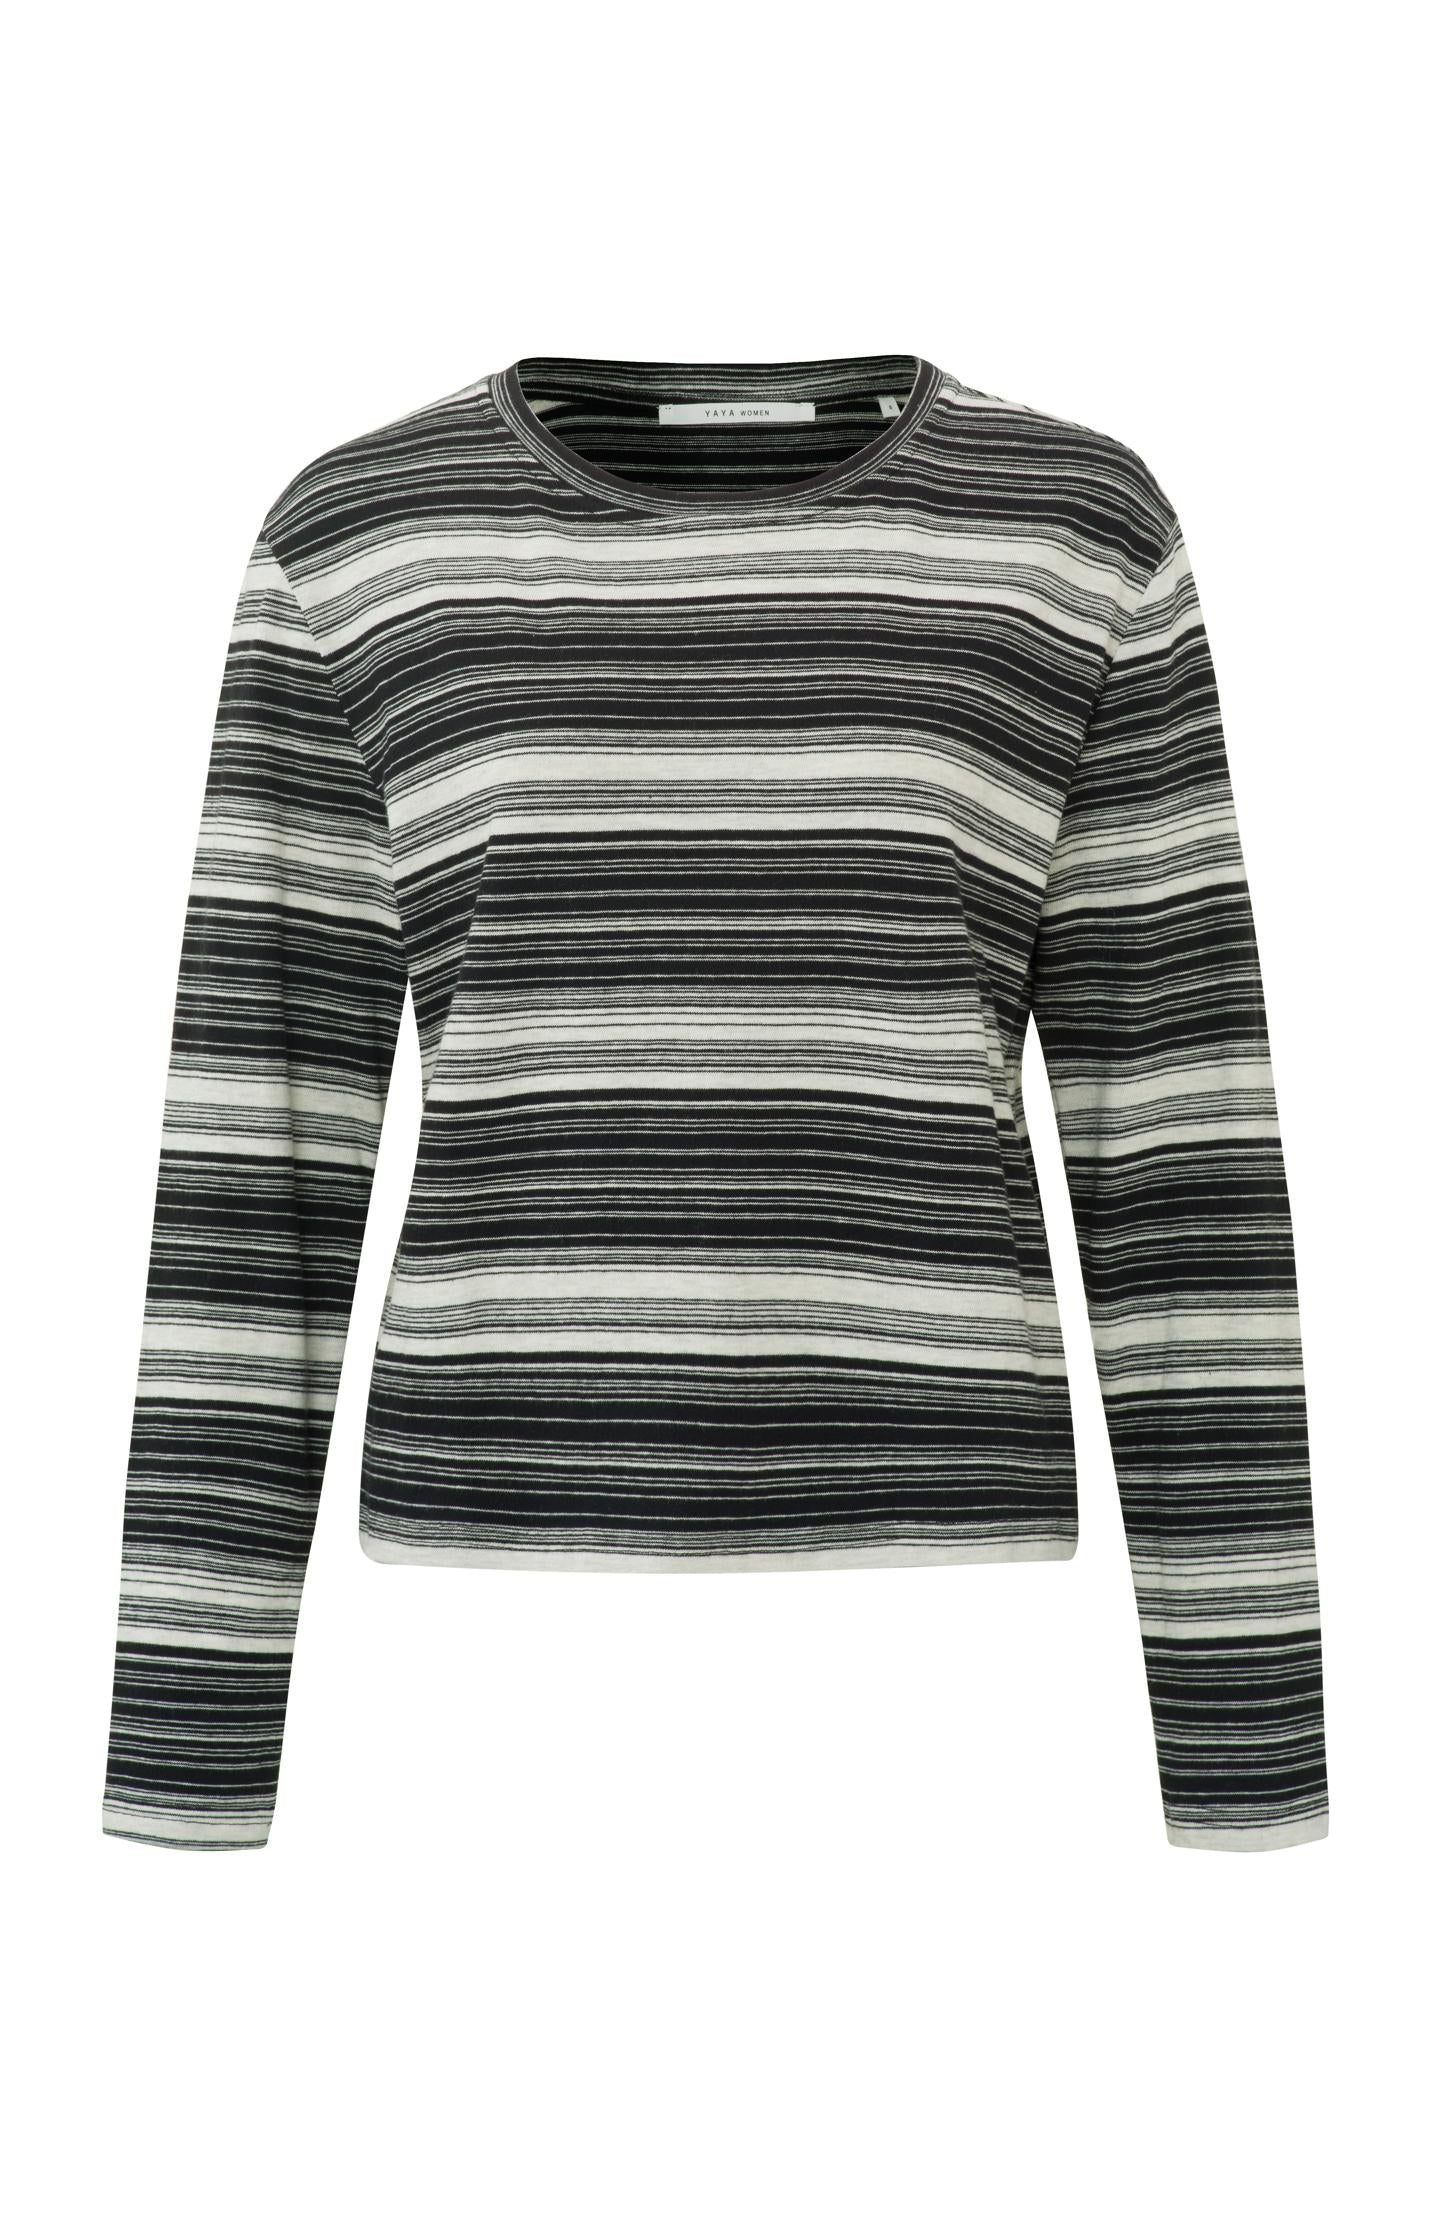 Striped top with crewneck and long sleeves in regular fit - Type: product